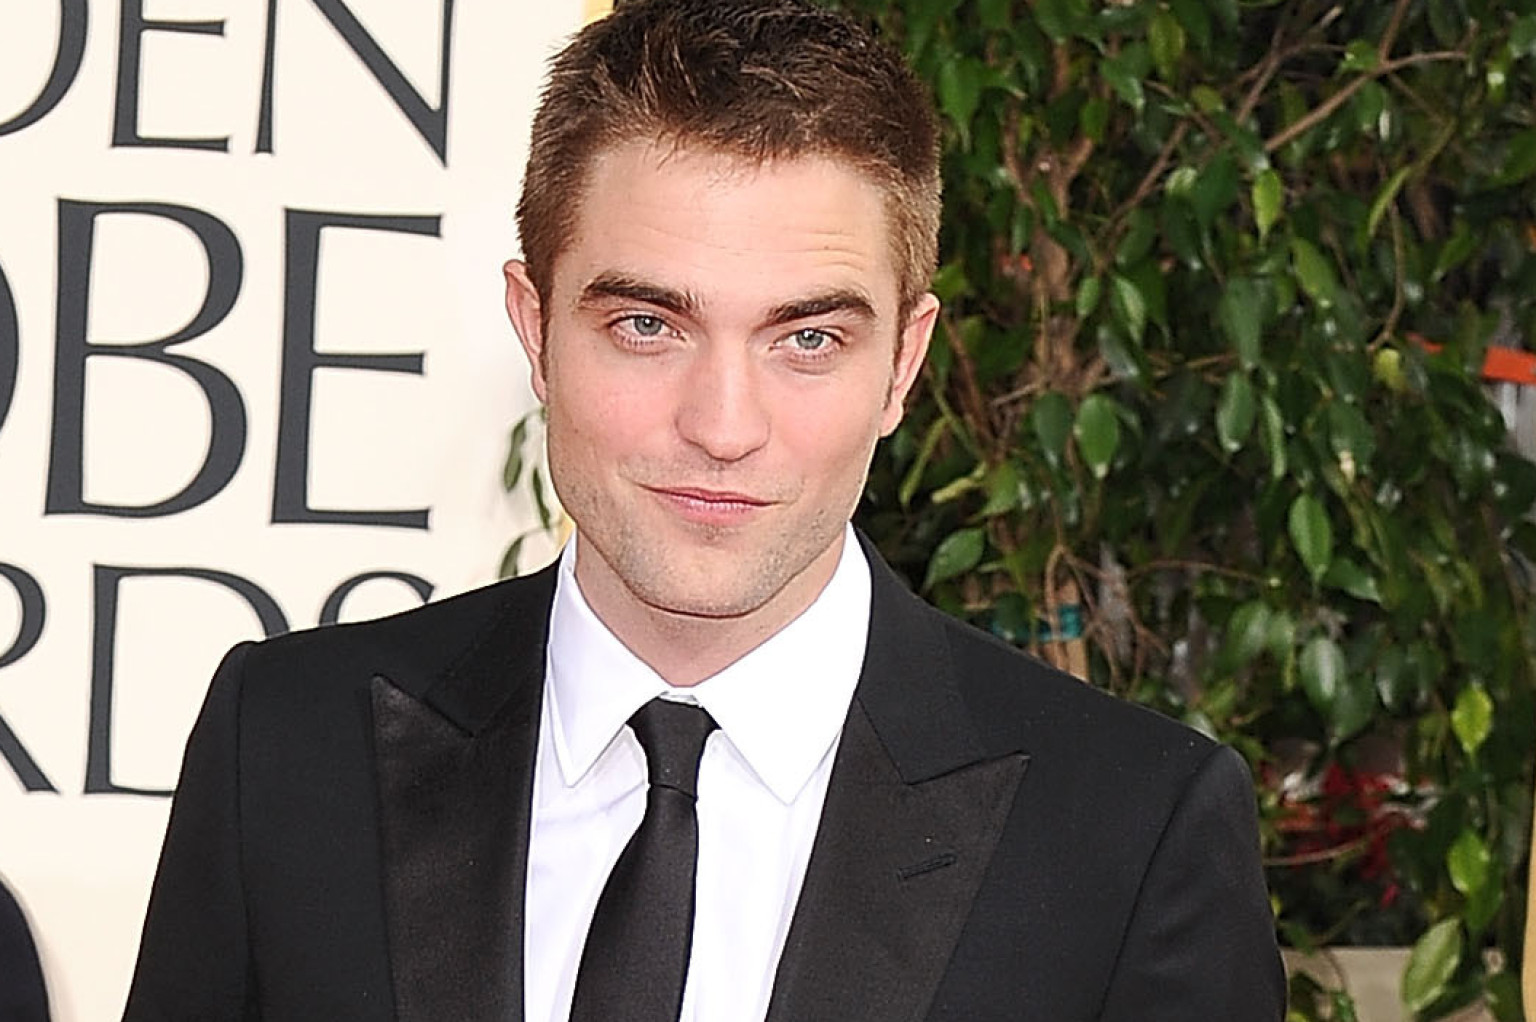 Robert Pattinson Dior Model Poses In Bathtub For Second Campaign Shot Photo Huffpost